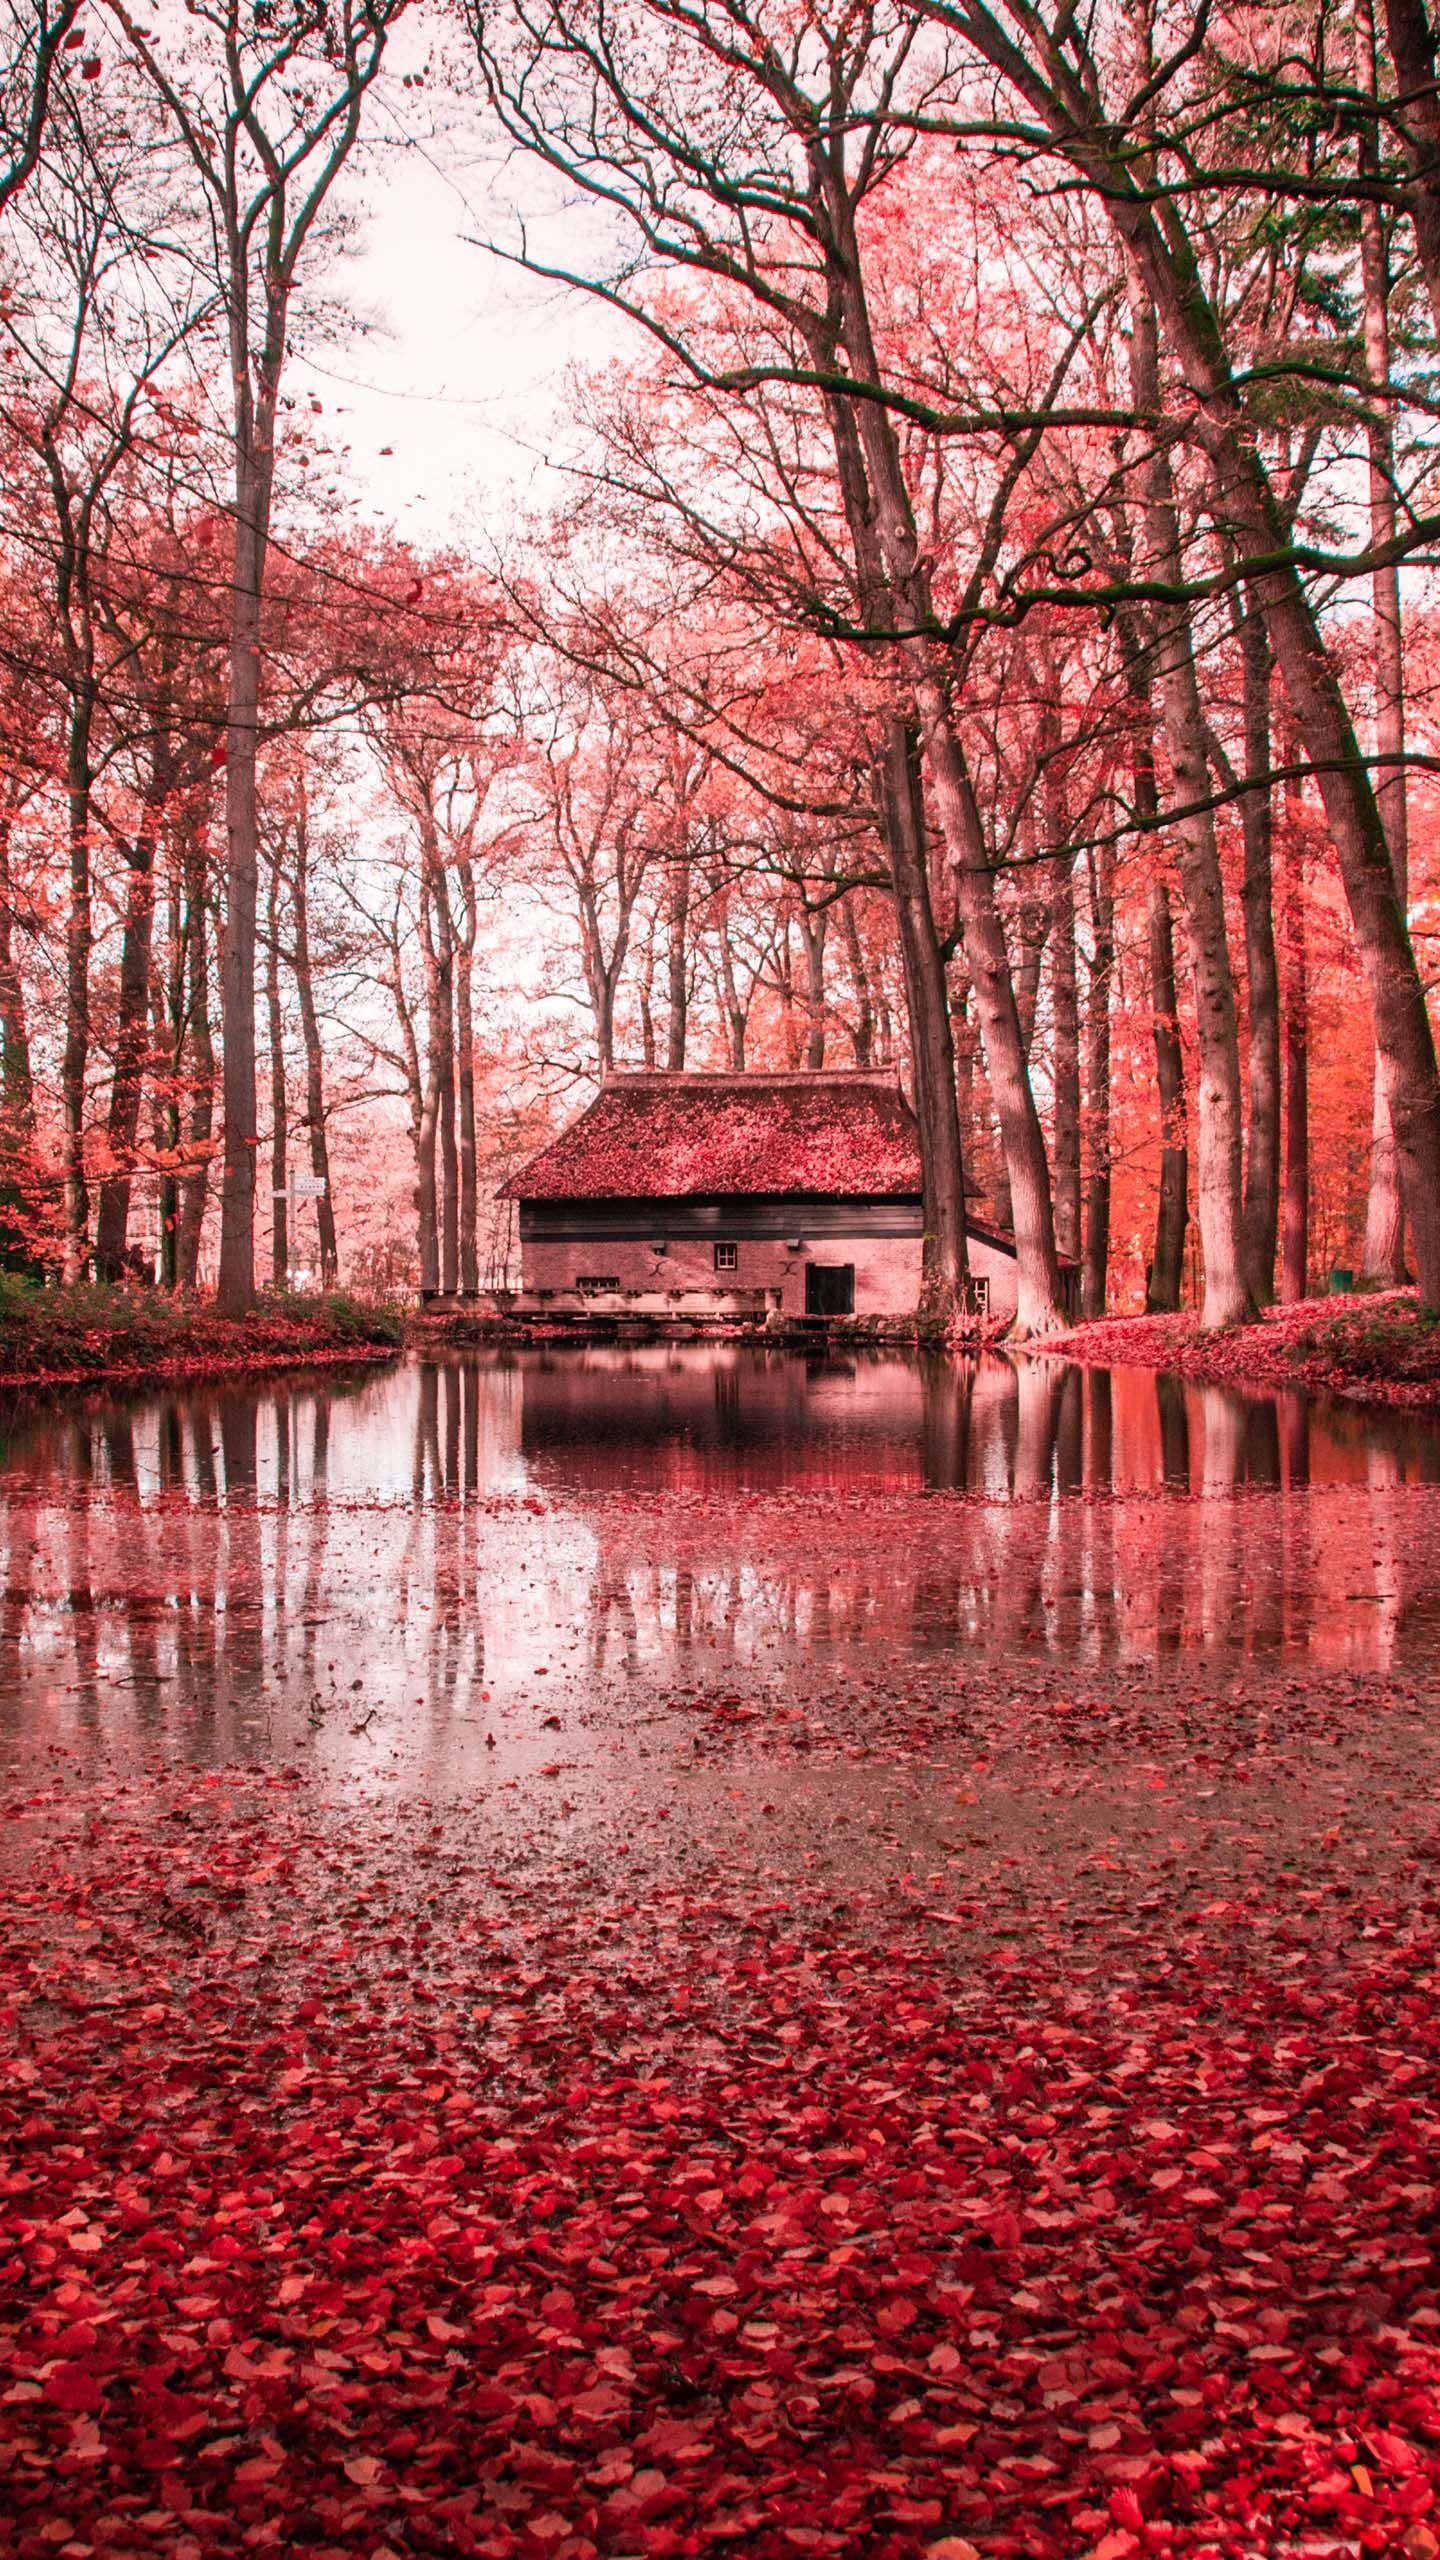 red #autumn #leaves #trees #house #forest #lake #water #nature